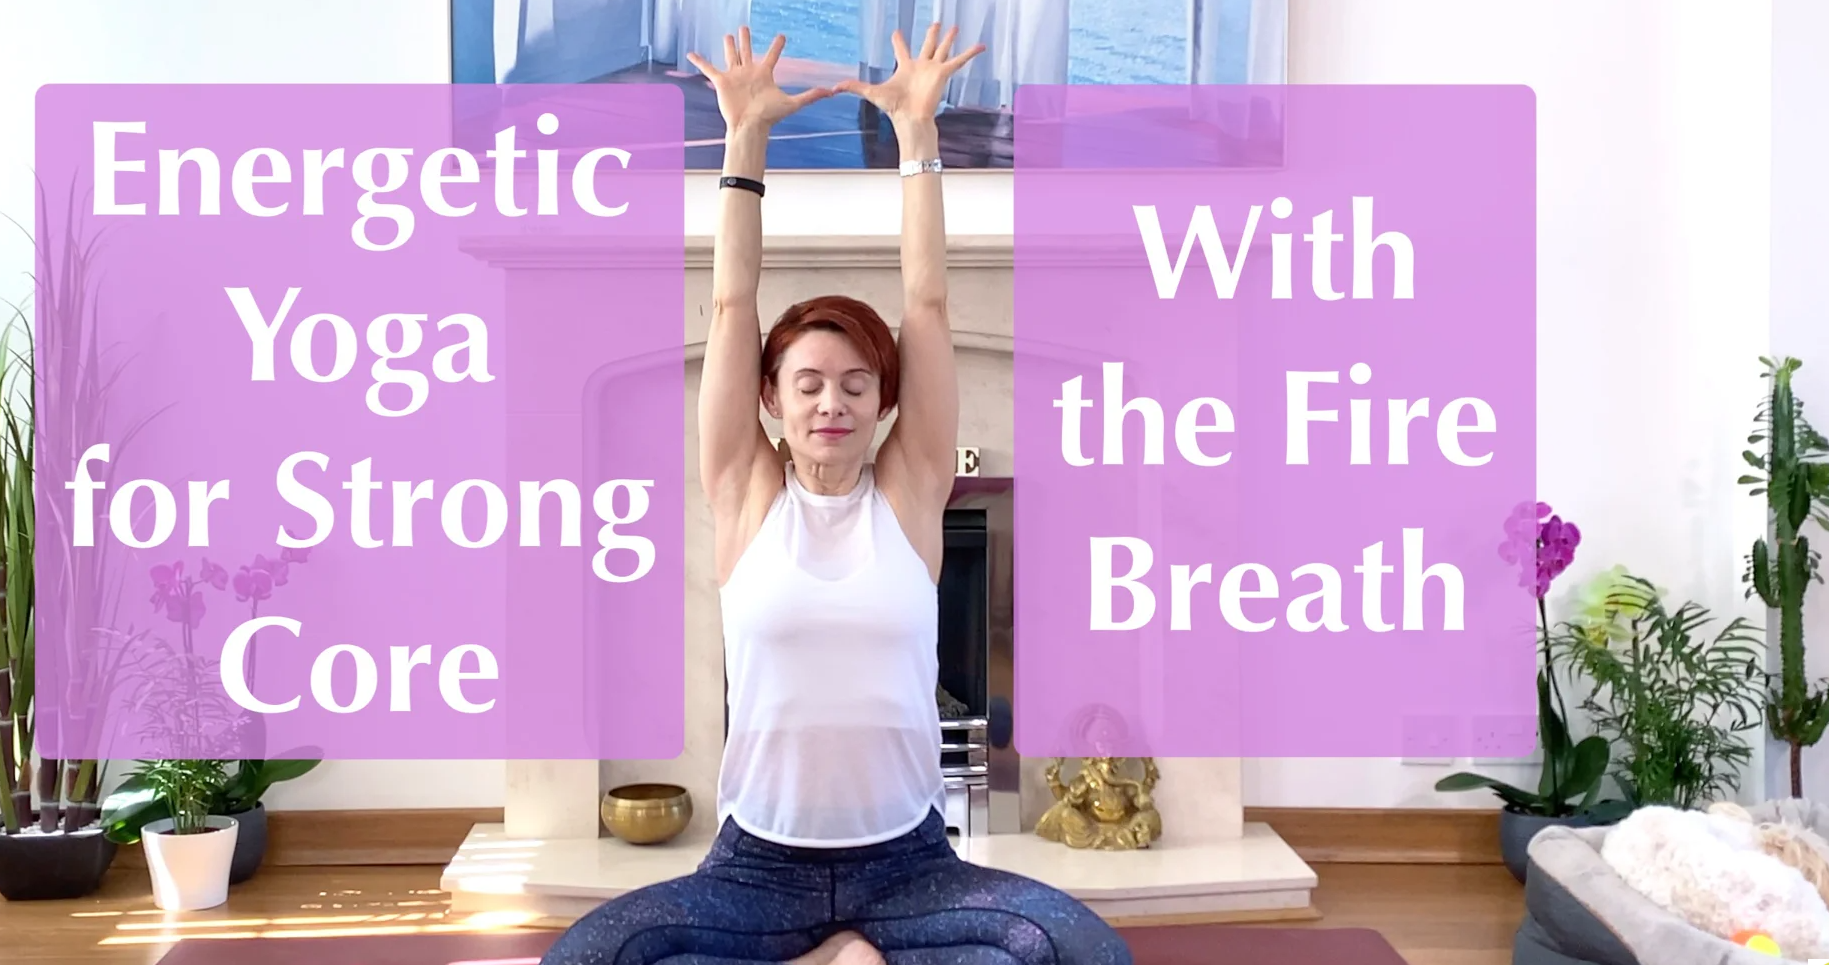 Olga Oakenfold - Energetic Yoga For Strong Core with the Fire Breath